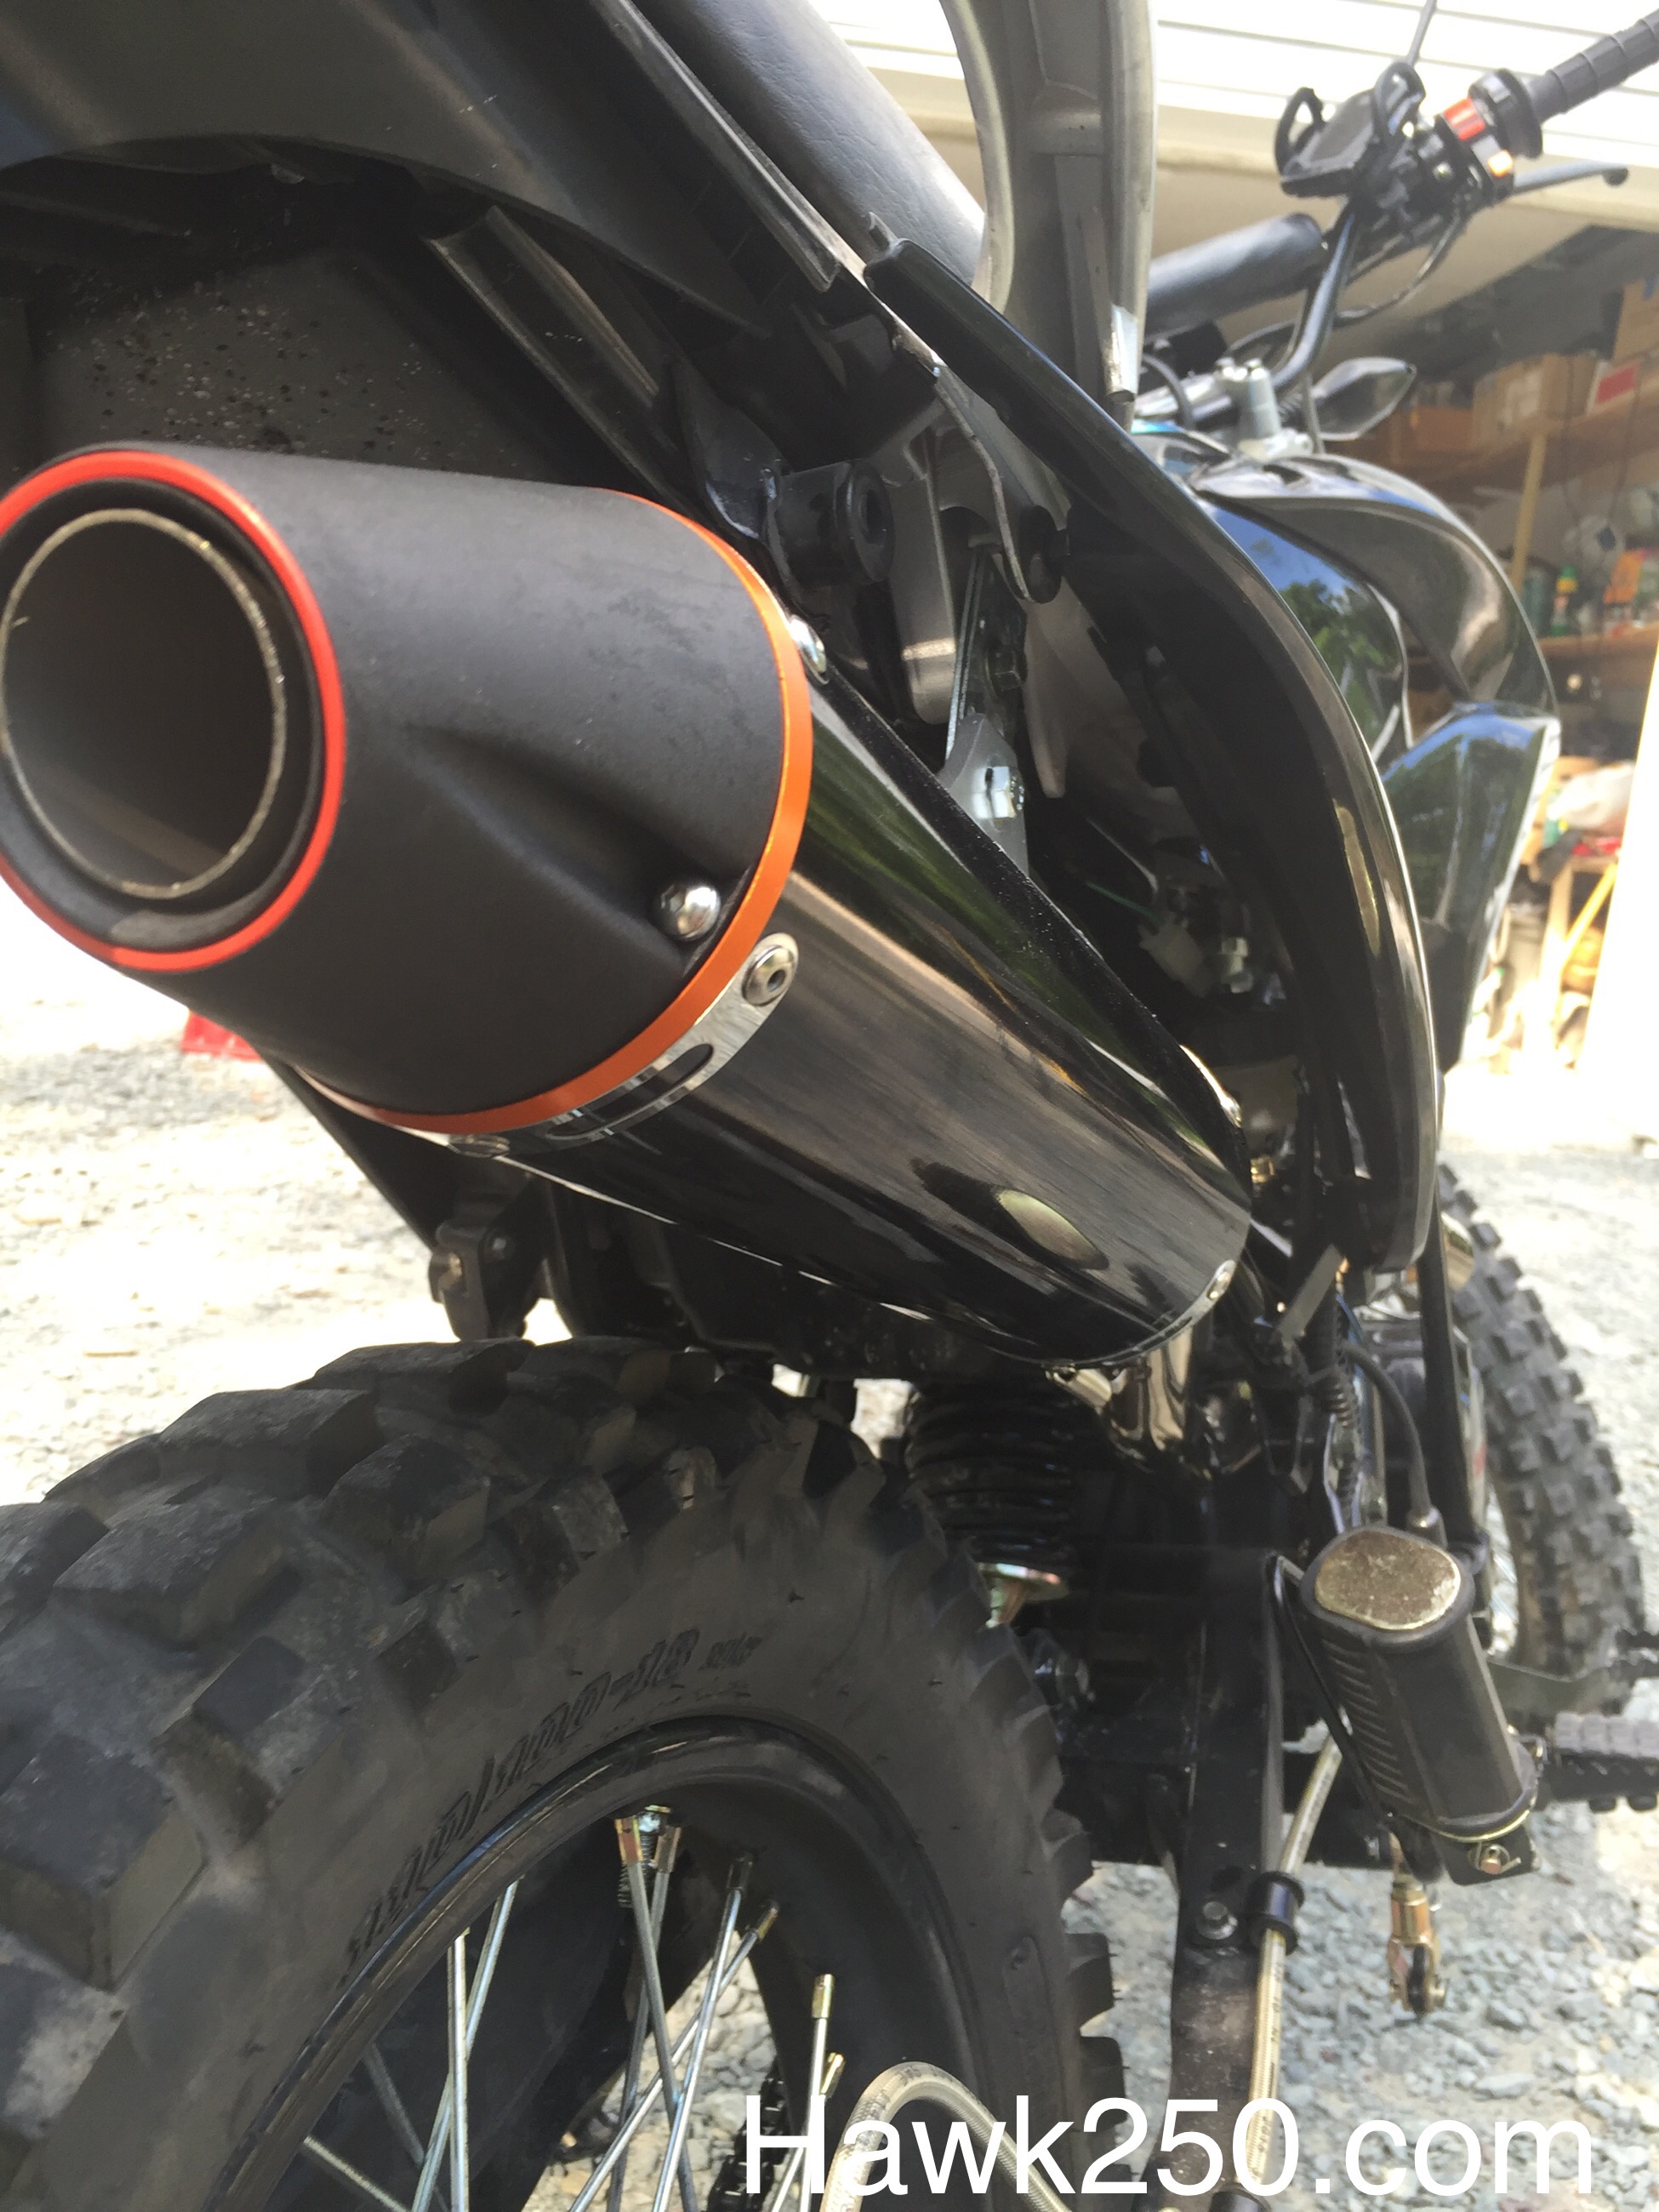 New Exhaust for Hawk 250